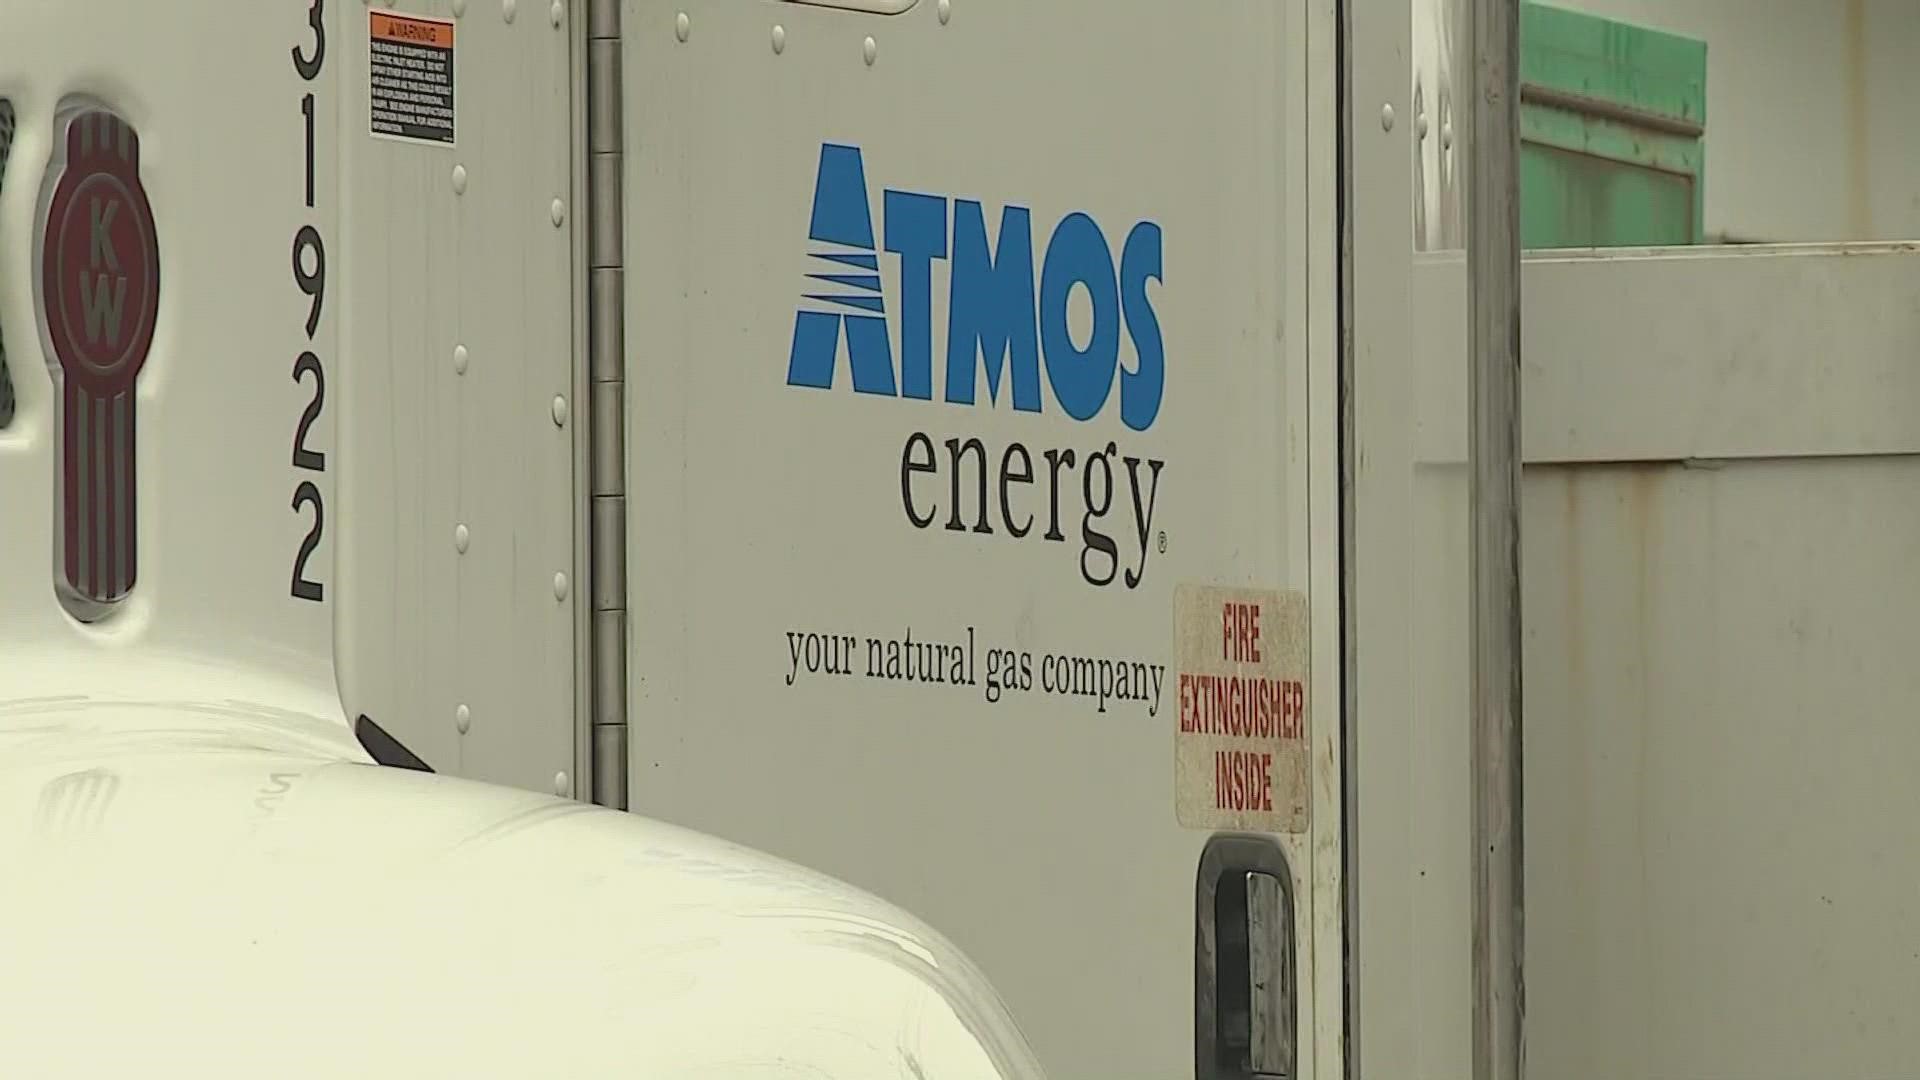 Many Texans dealt with low gas pressure during the arctic blast before Christmas weekend.